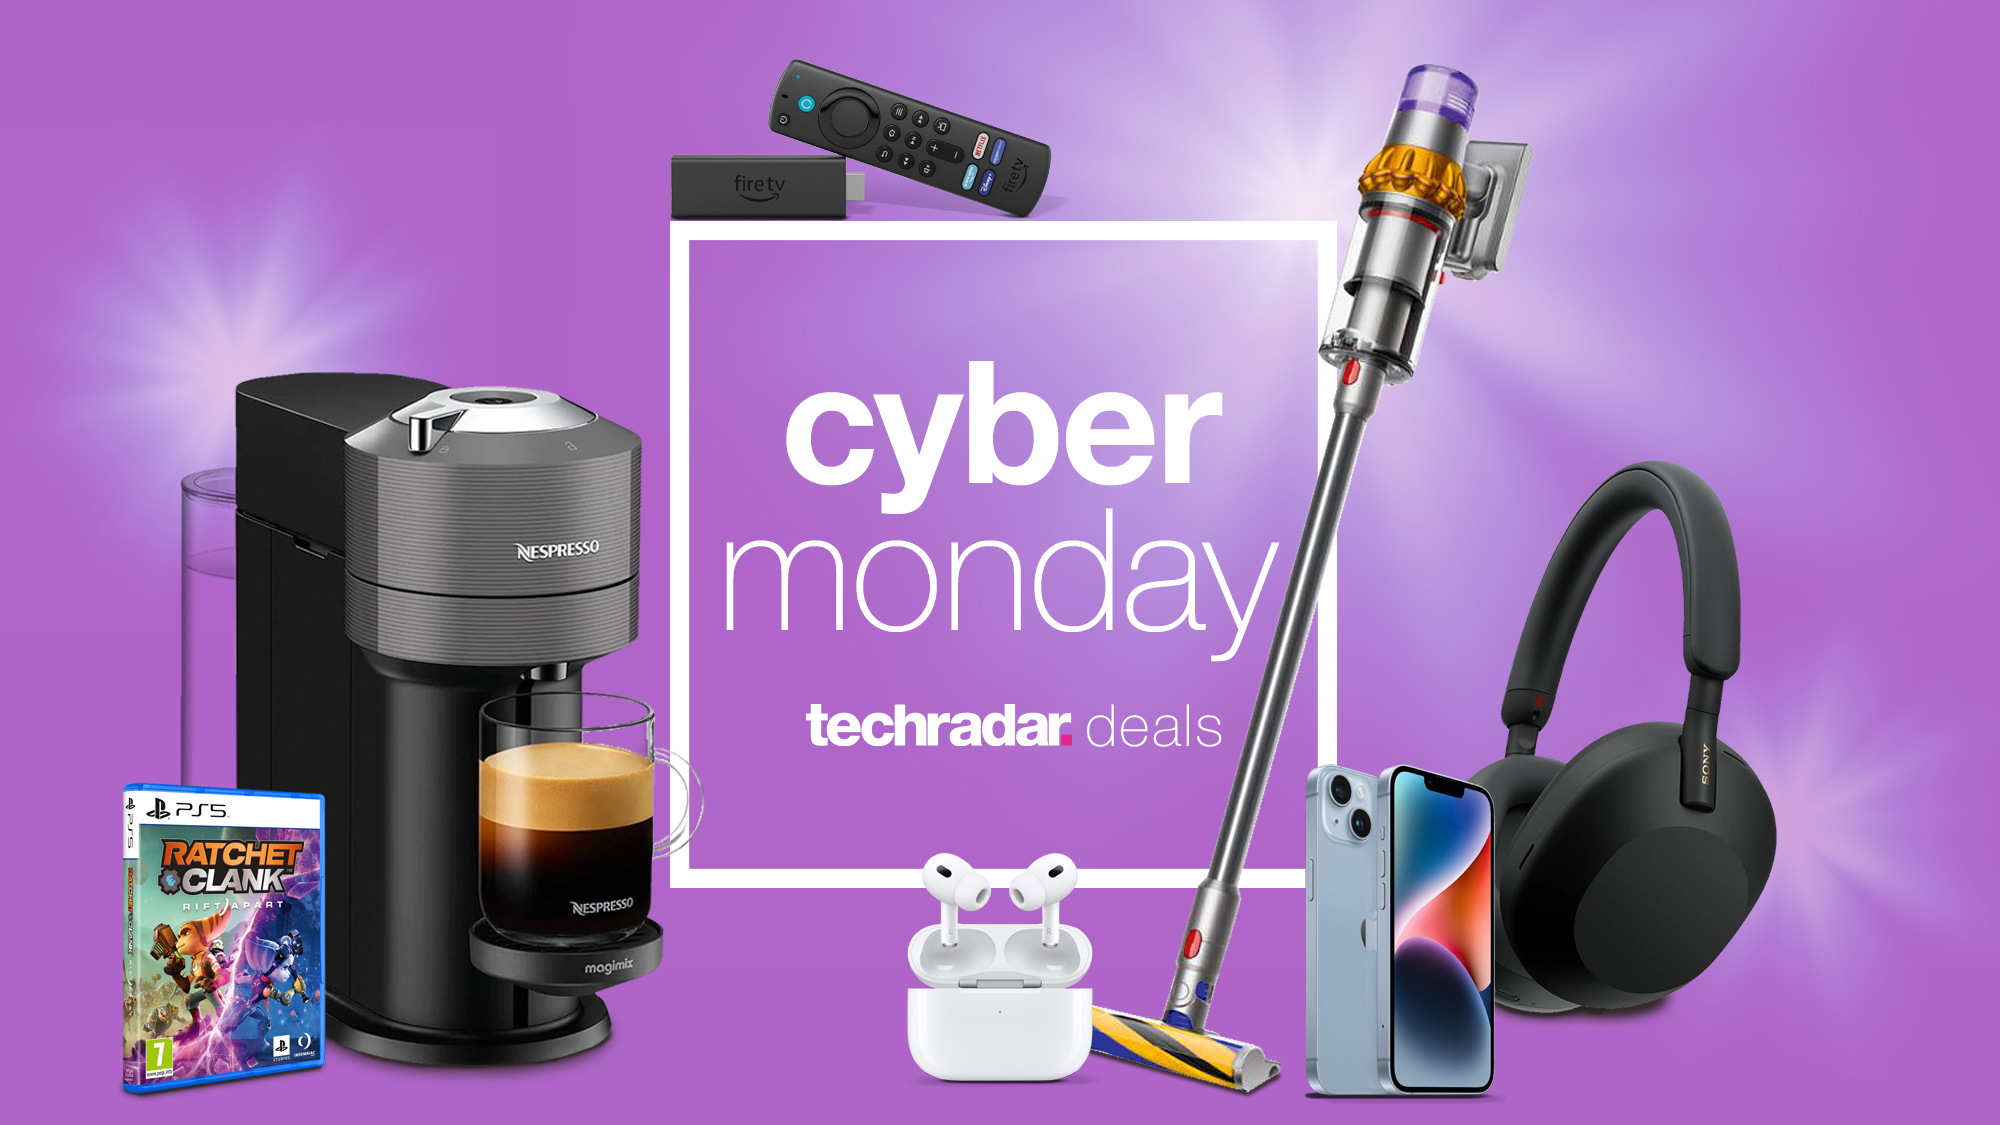 Assorted tech products on a purple background with 'Cyber Monday deals' text overlay